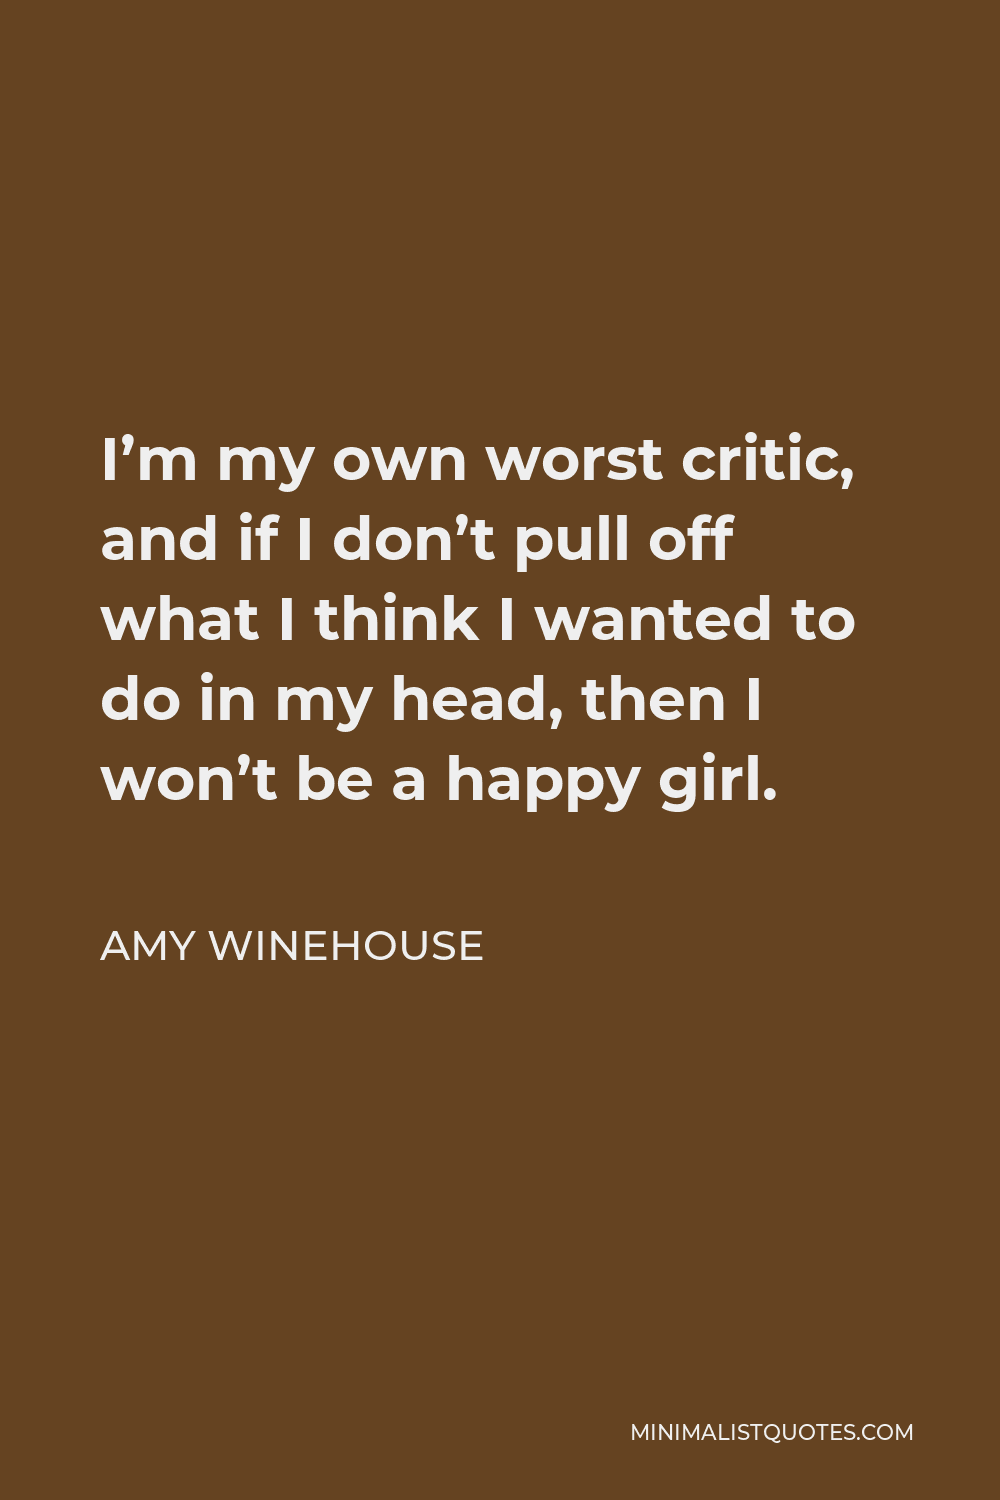 Amy Winehouse Quote - I’m my own worst critic, and if I don’t pull off what I think I wanted to do in my head, then I won’t be a happy girl.